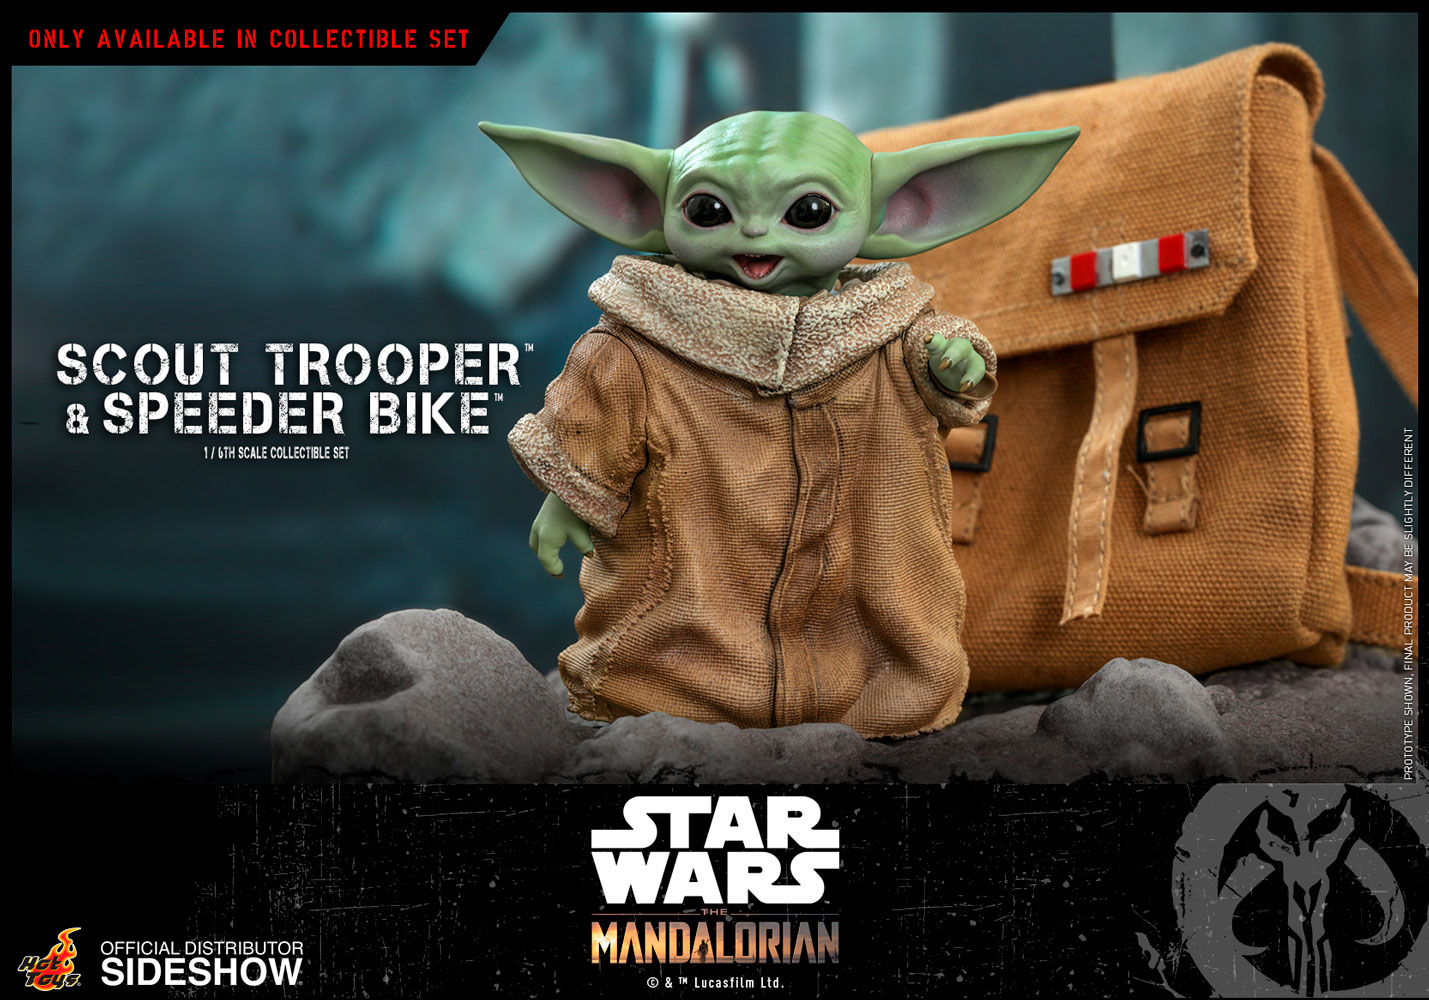 Hot Toys - Scout Trooper and Speeder Bike - 1:6 Scale Collectible - The Mandalorian - Television Masterpiece Series